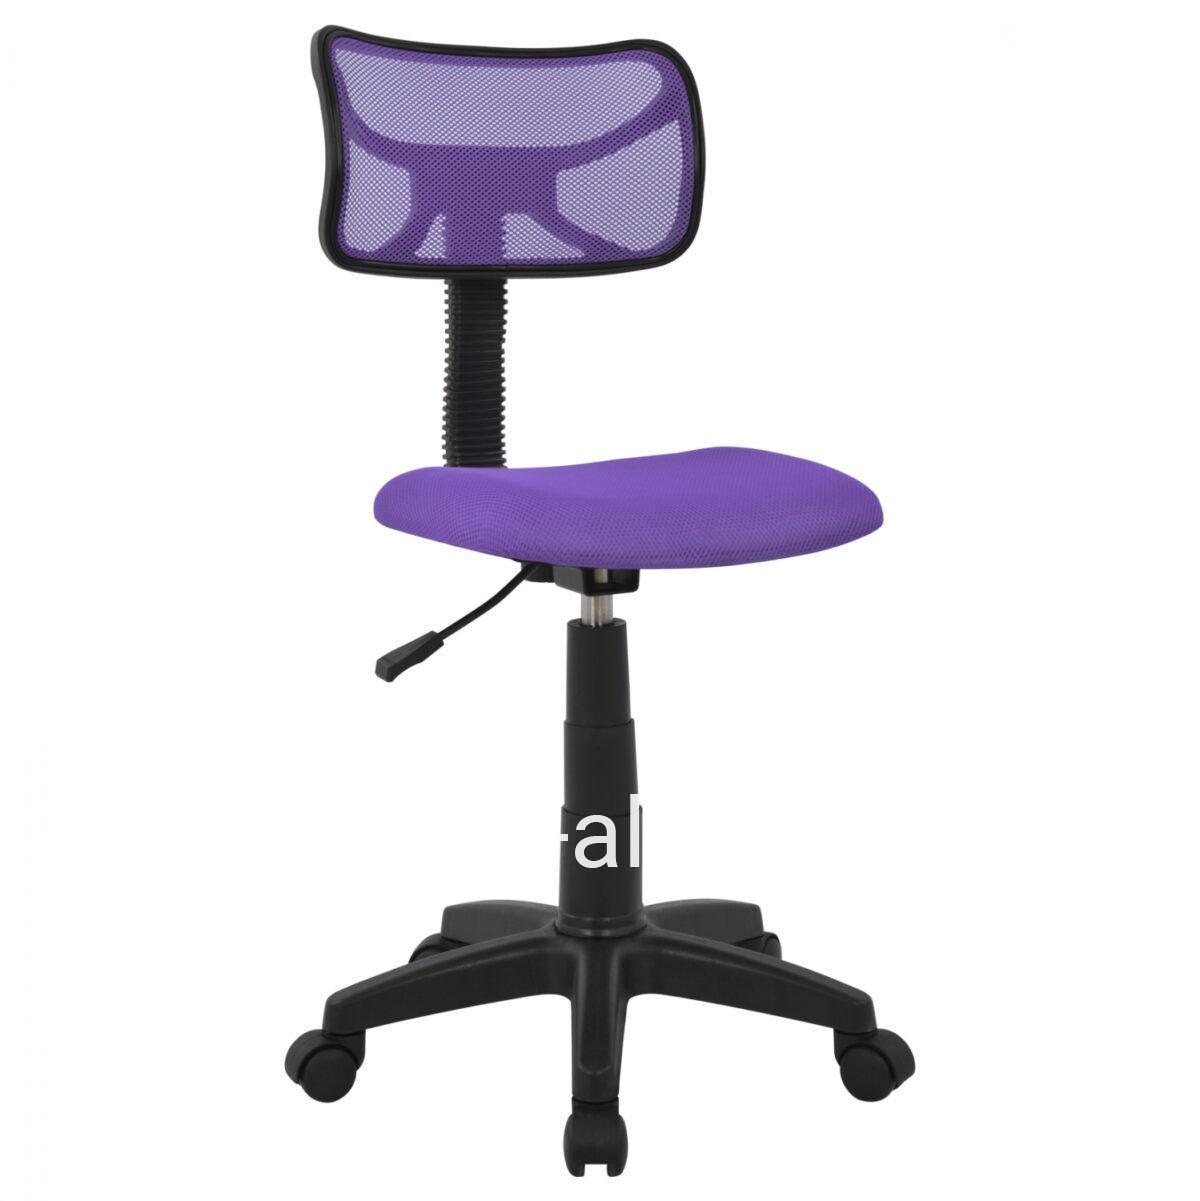 Office chair HM1026.04 purple with mesh fabric 40